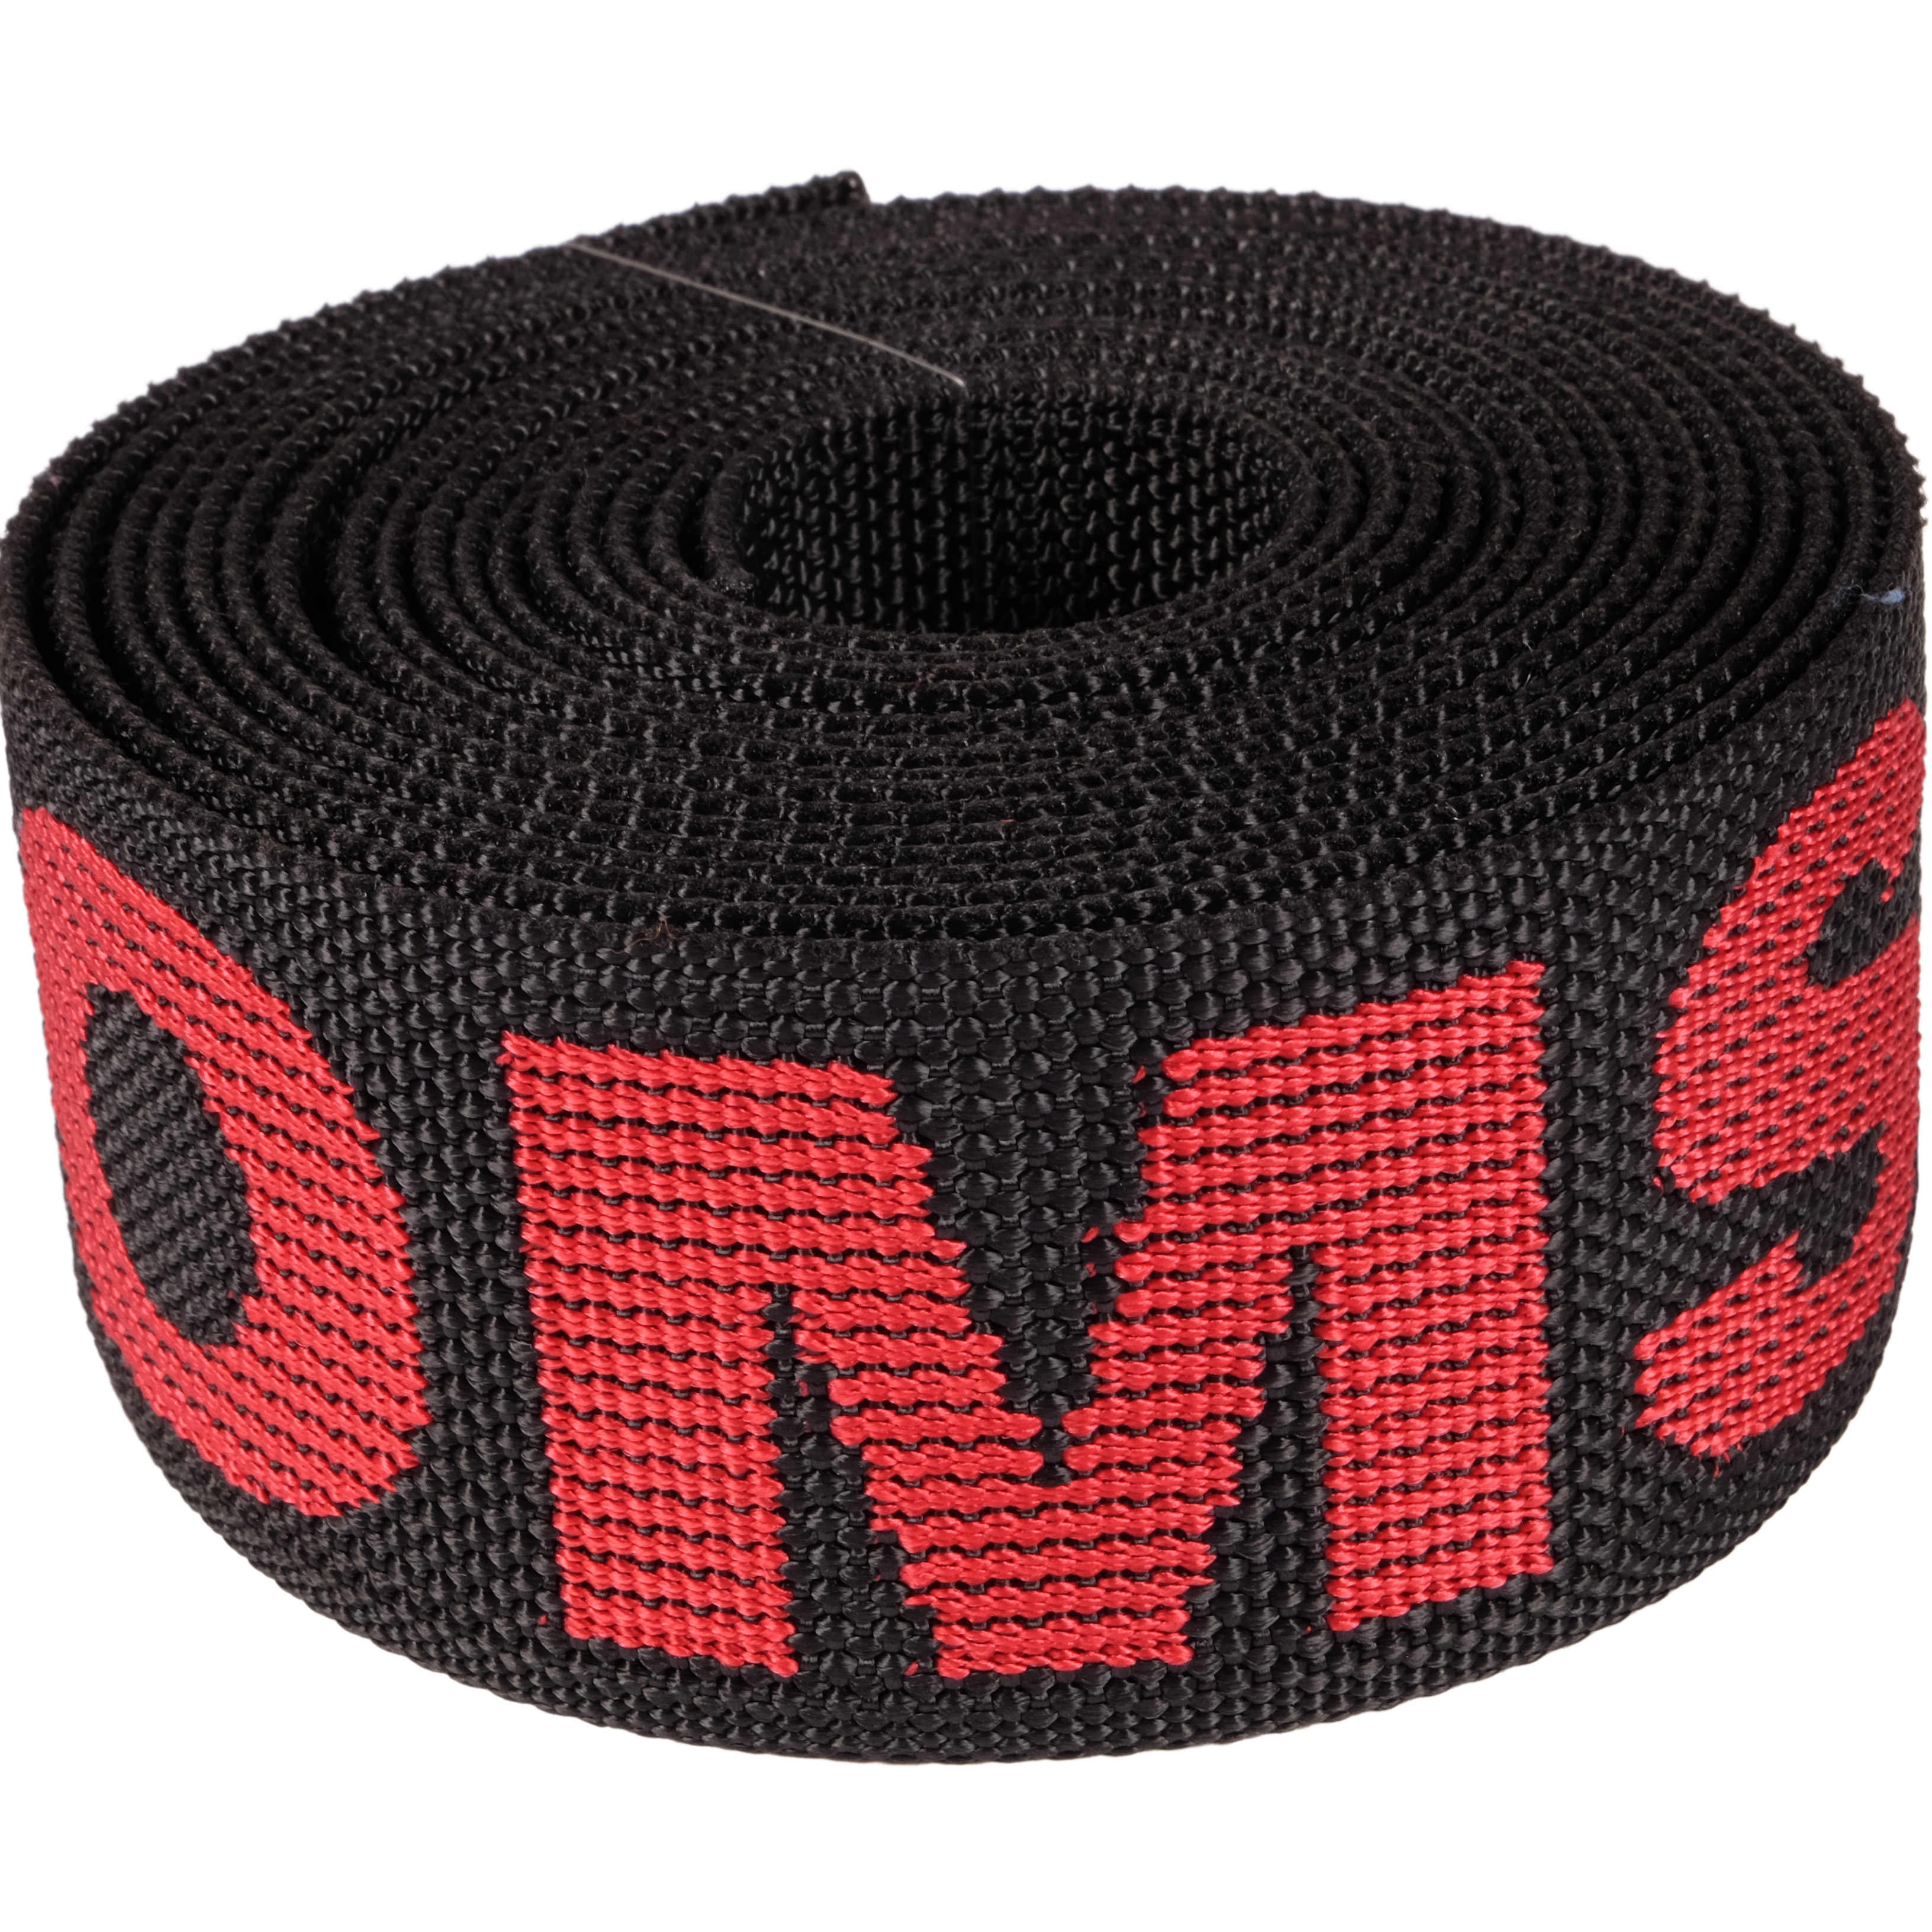 OMS Webbing Replacement (black-red)